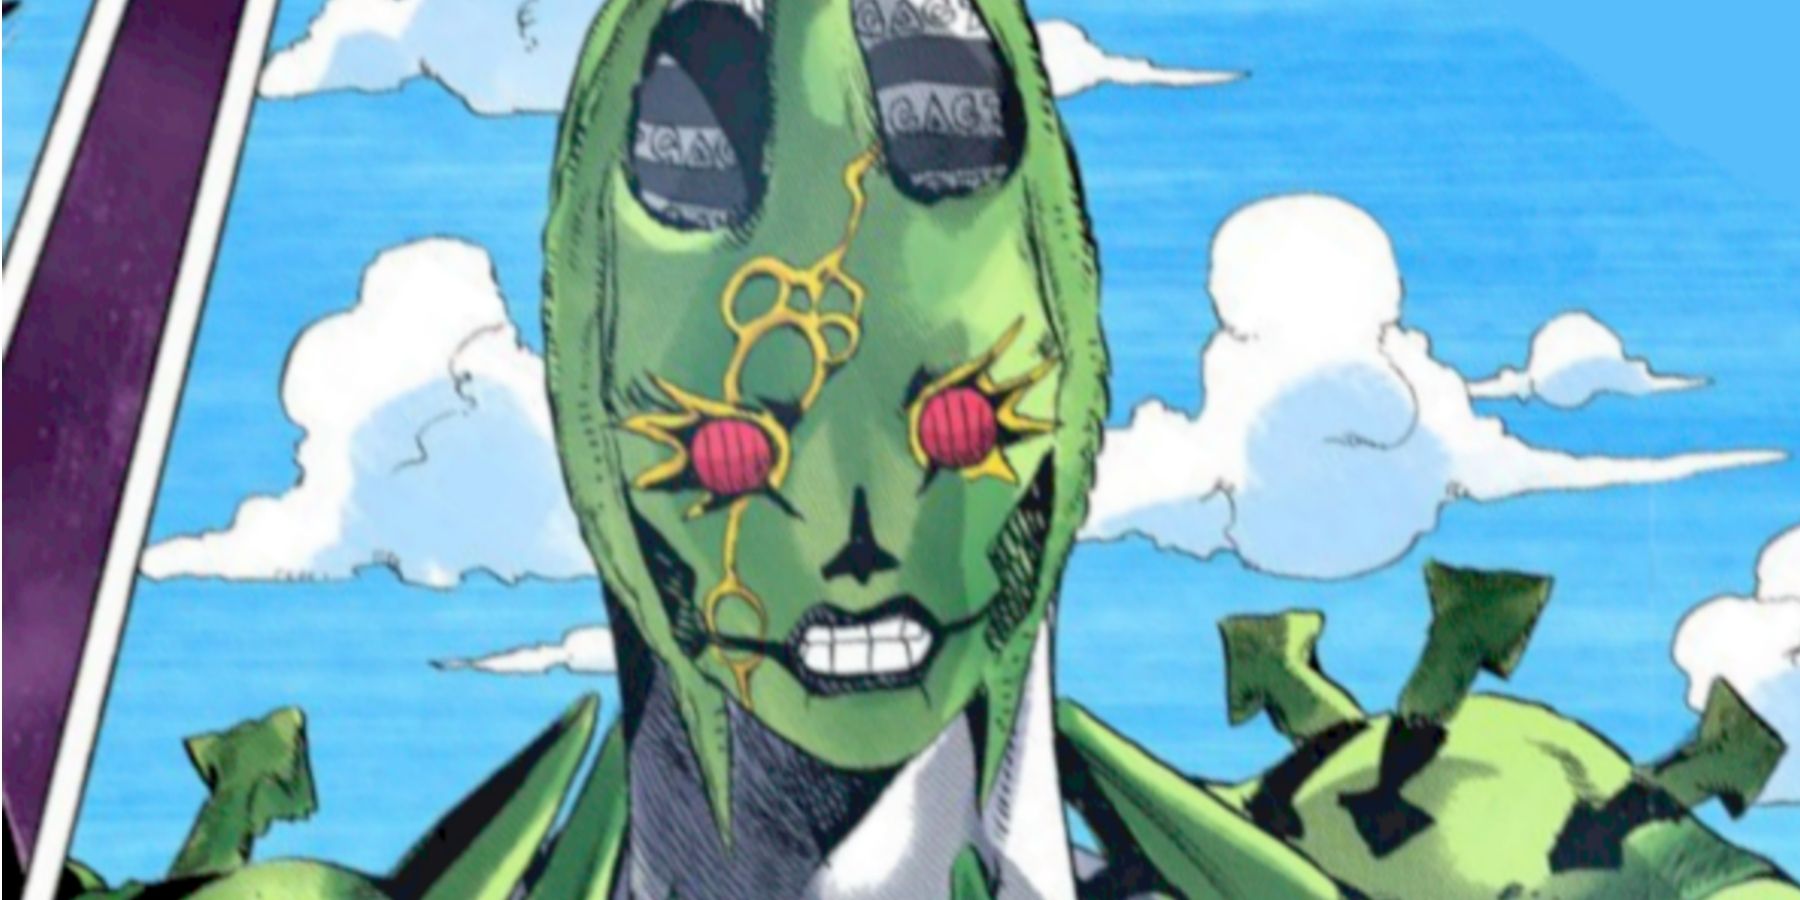 C-Moon, Pucci's stand